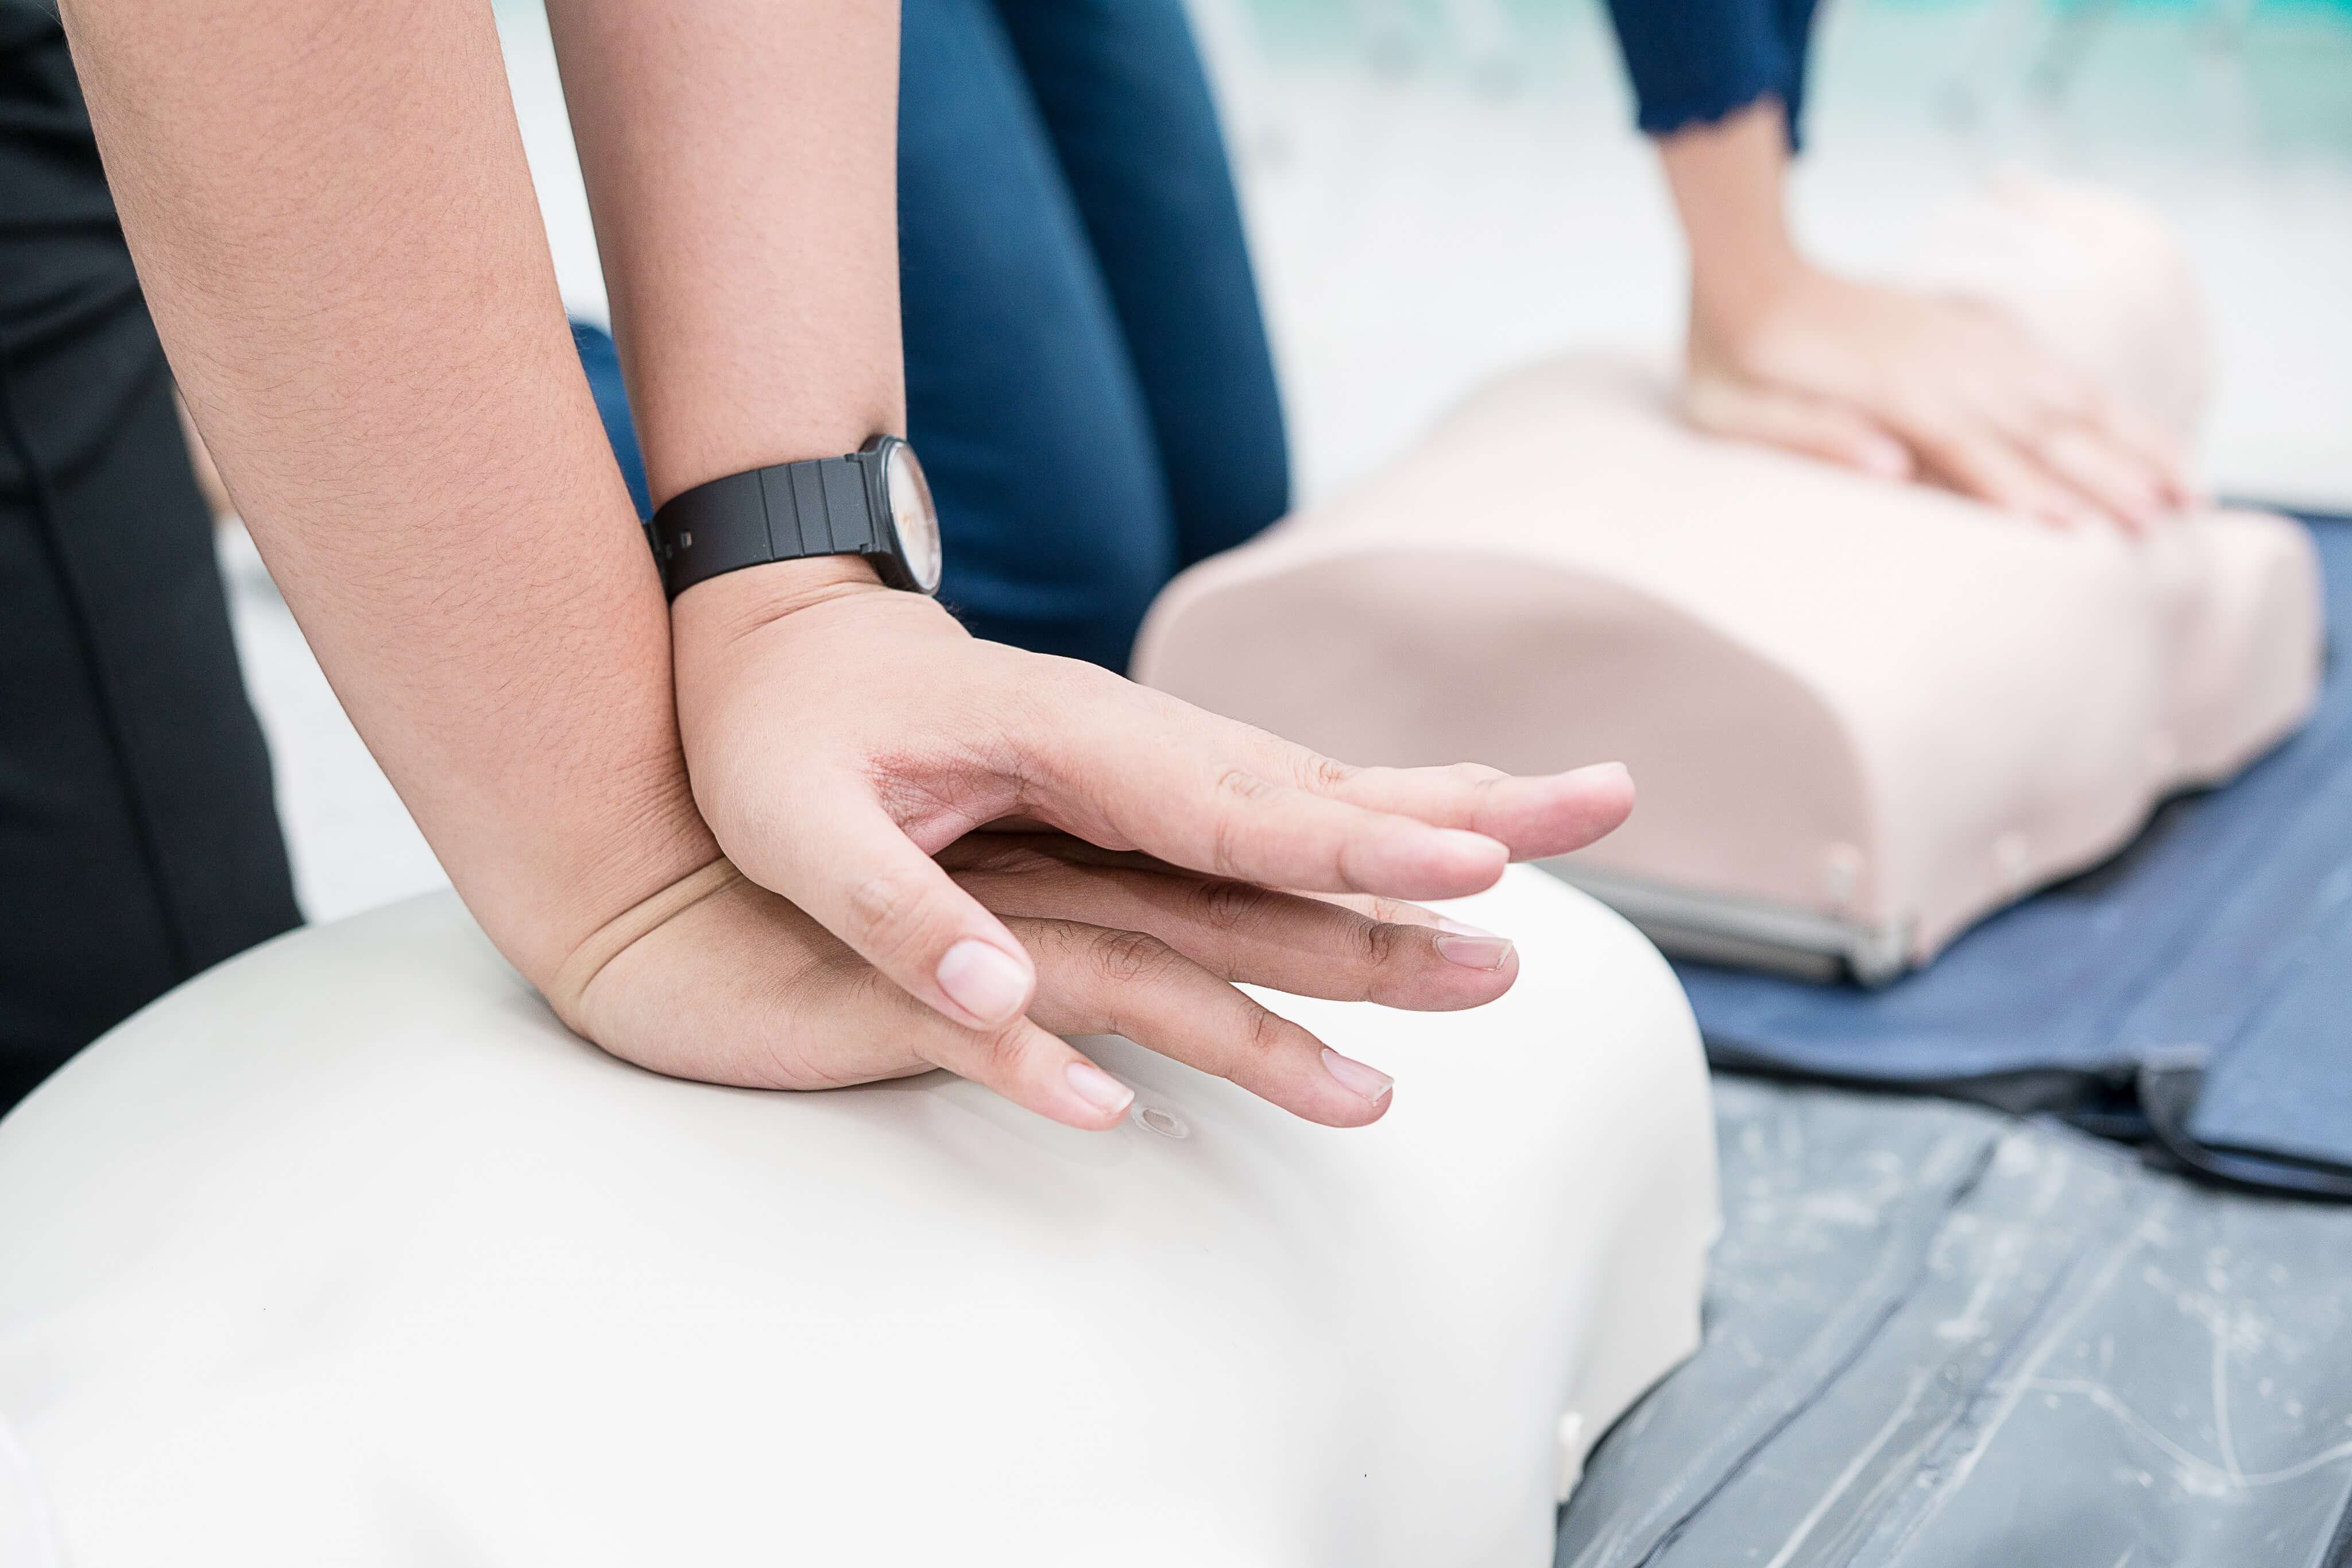 Be Prepared, Learn How to Save A Life with Our First Aid Training Course